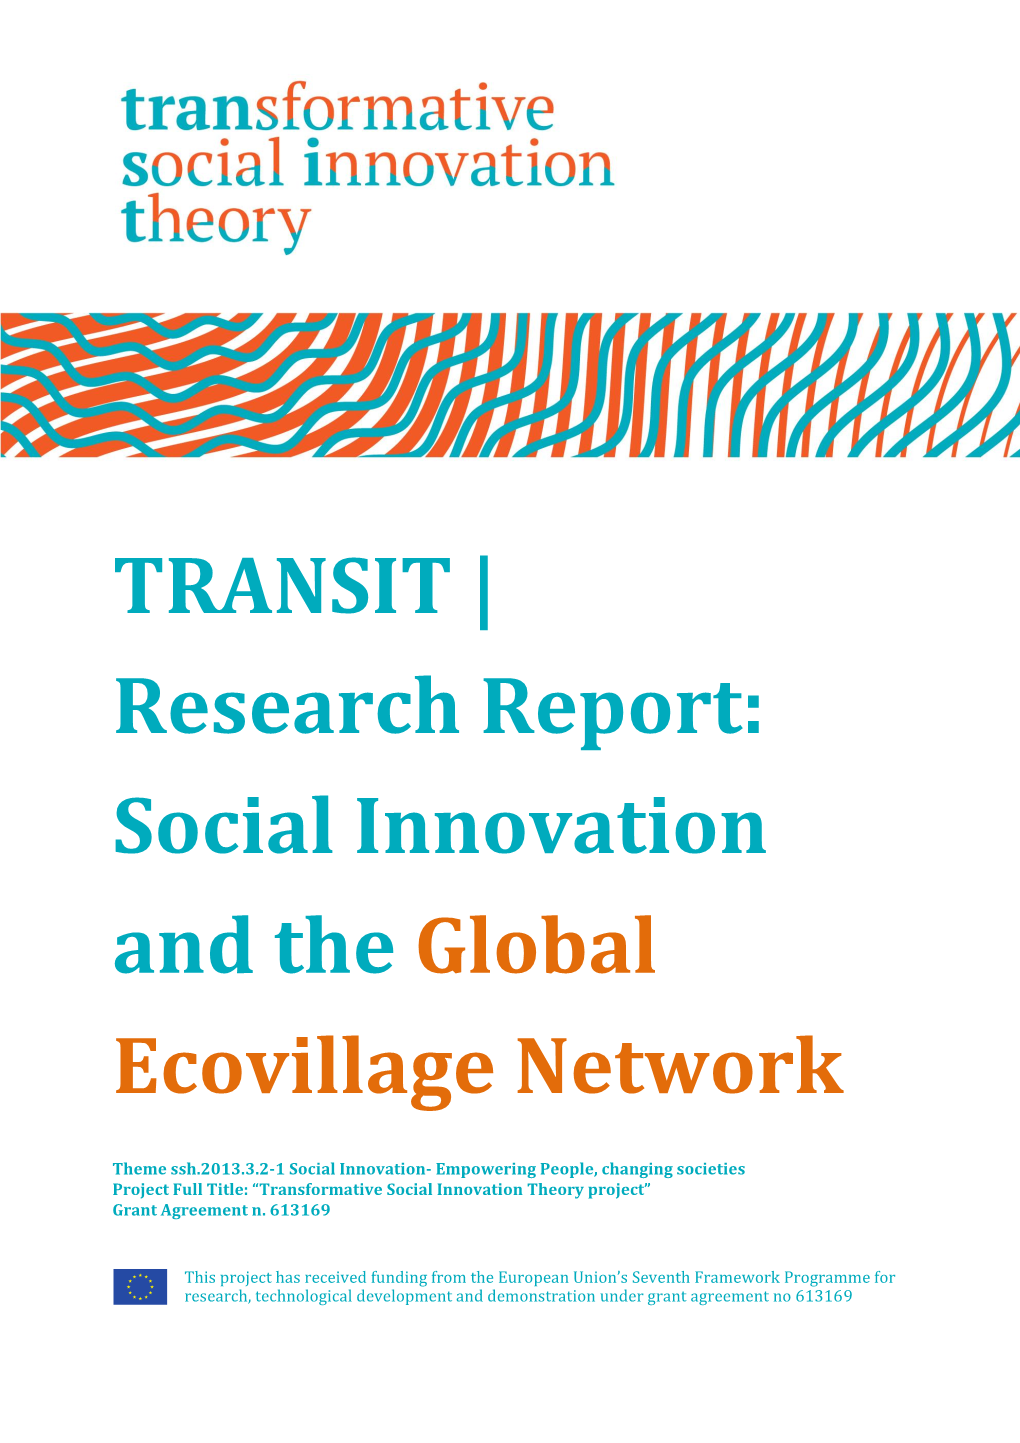 Research Report: Social Innovation and the Global Ecovillage Network